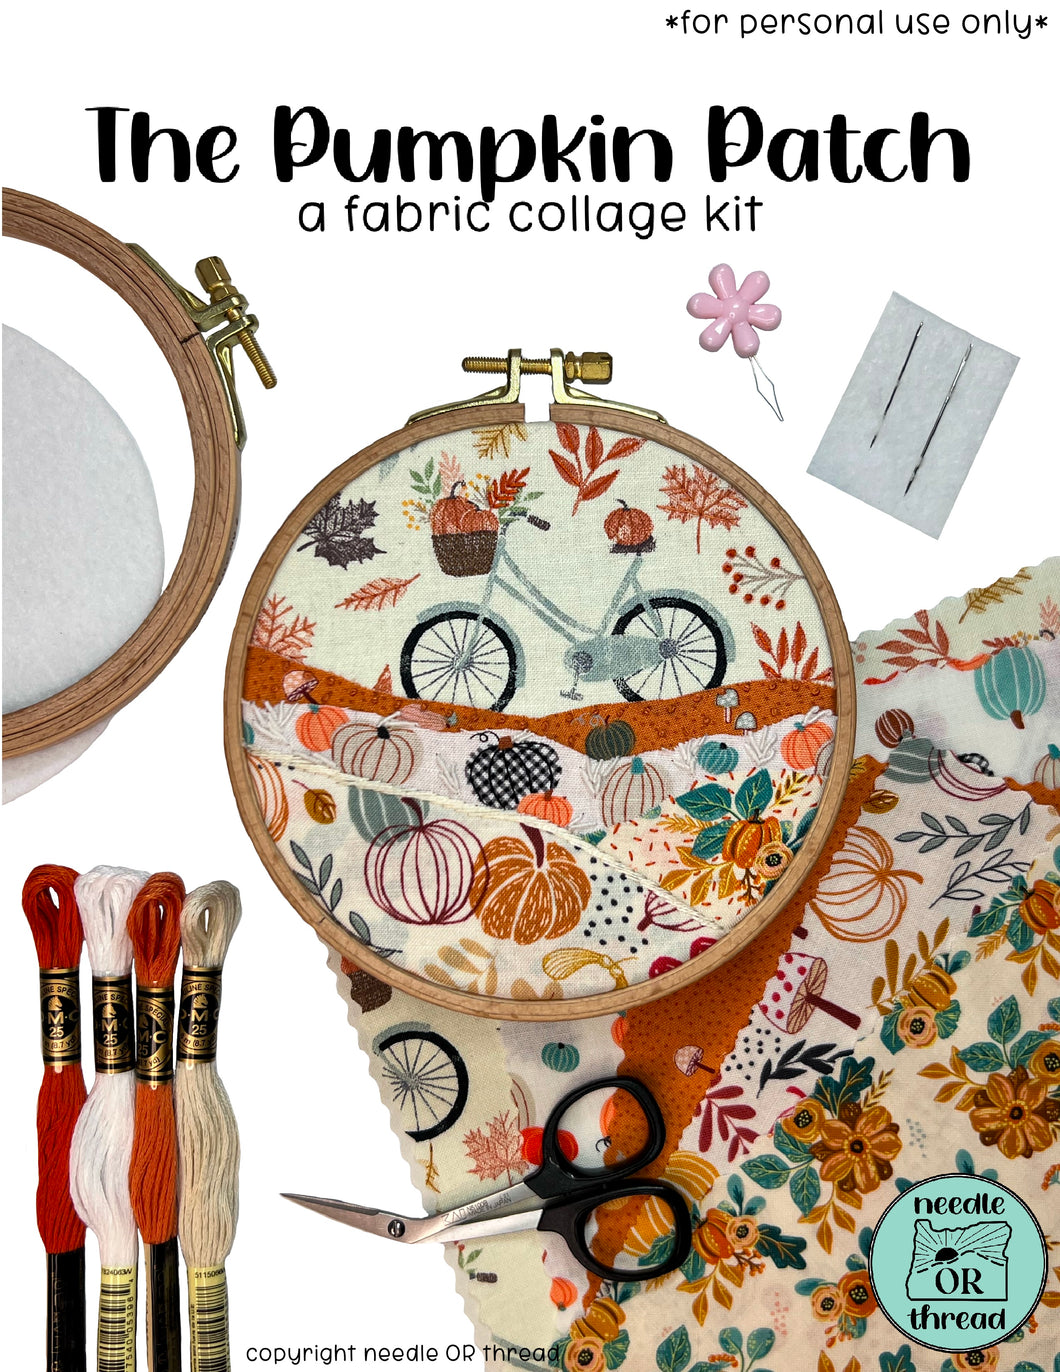 The Pumpkin Patch Fabric Collage Kit